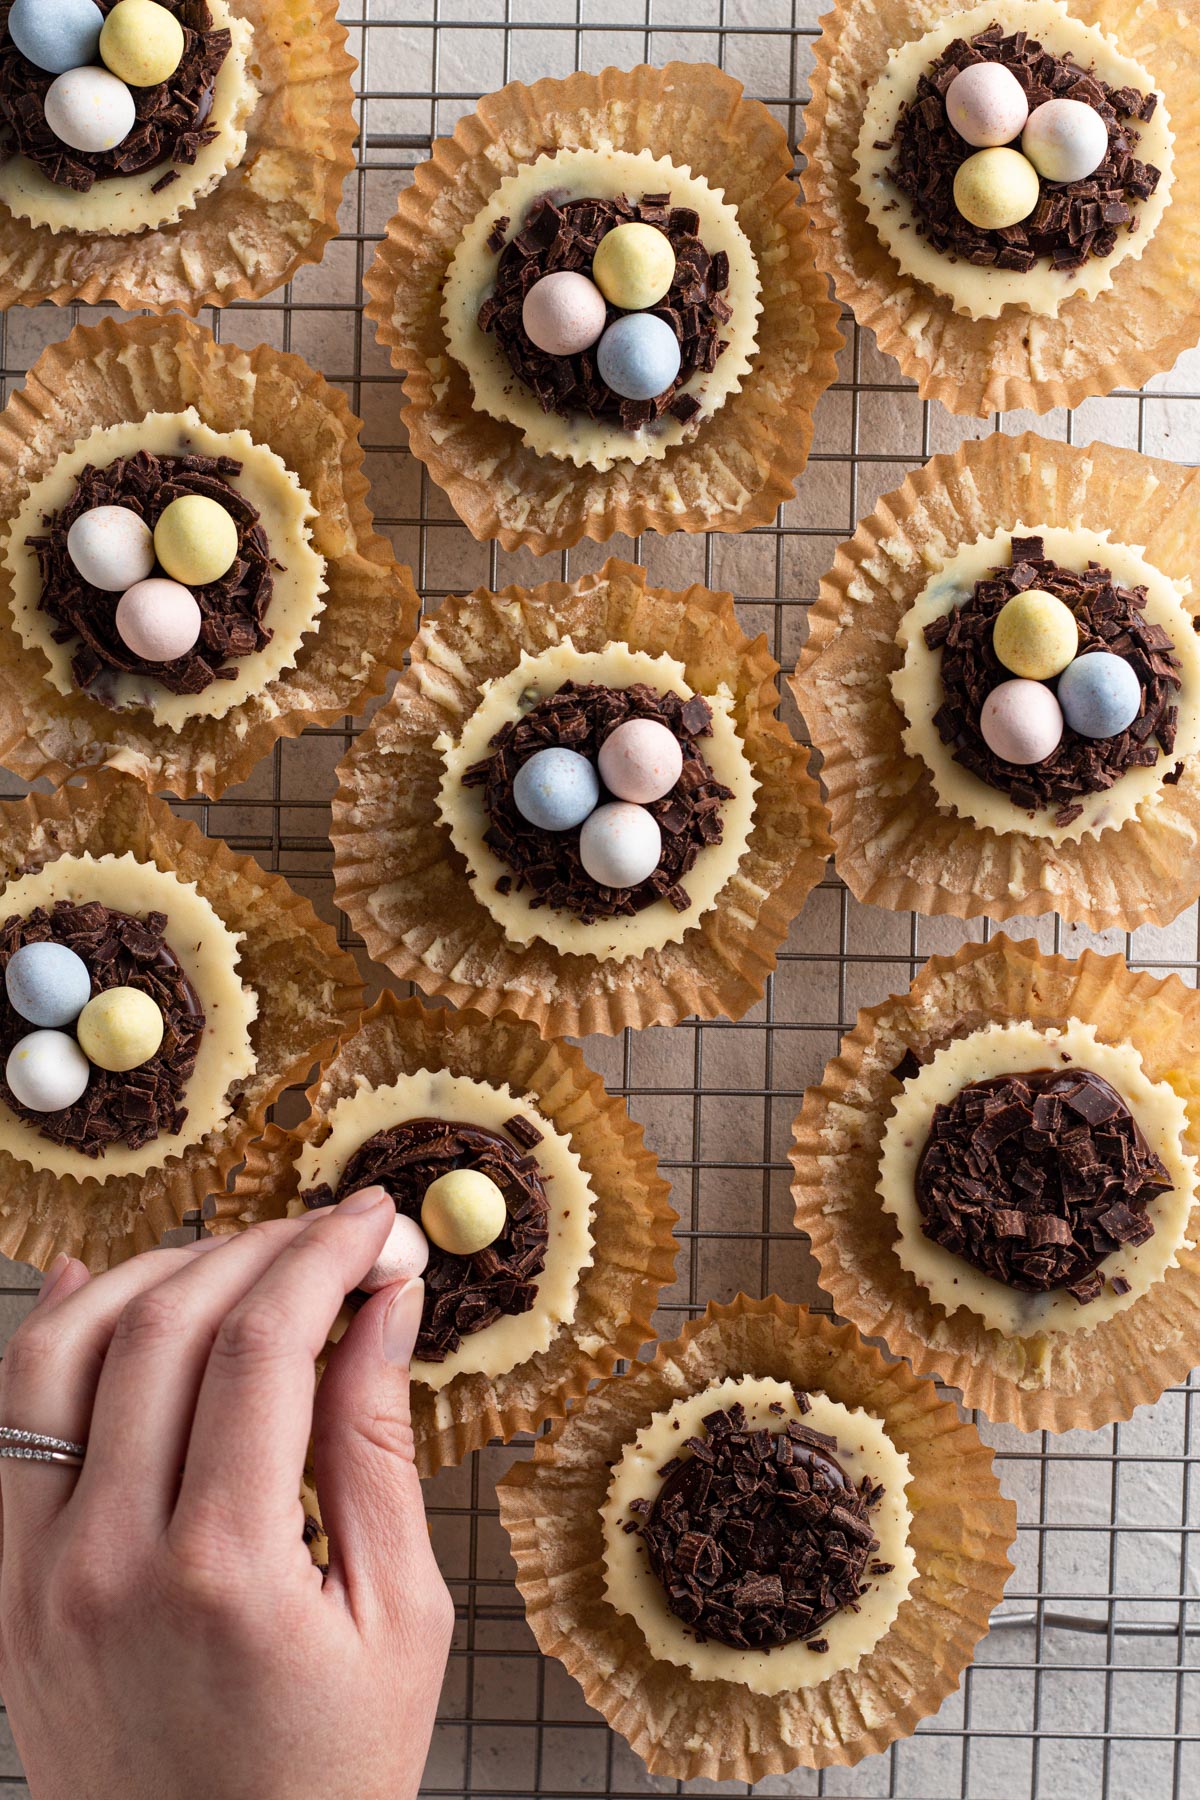 Hand placing mini eggs into "nests" on tops of cheesecakes.